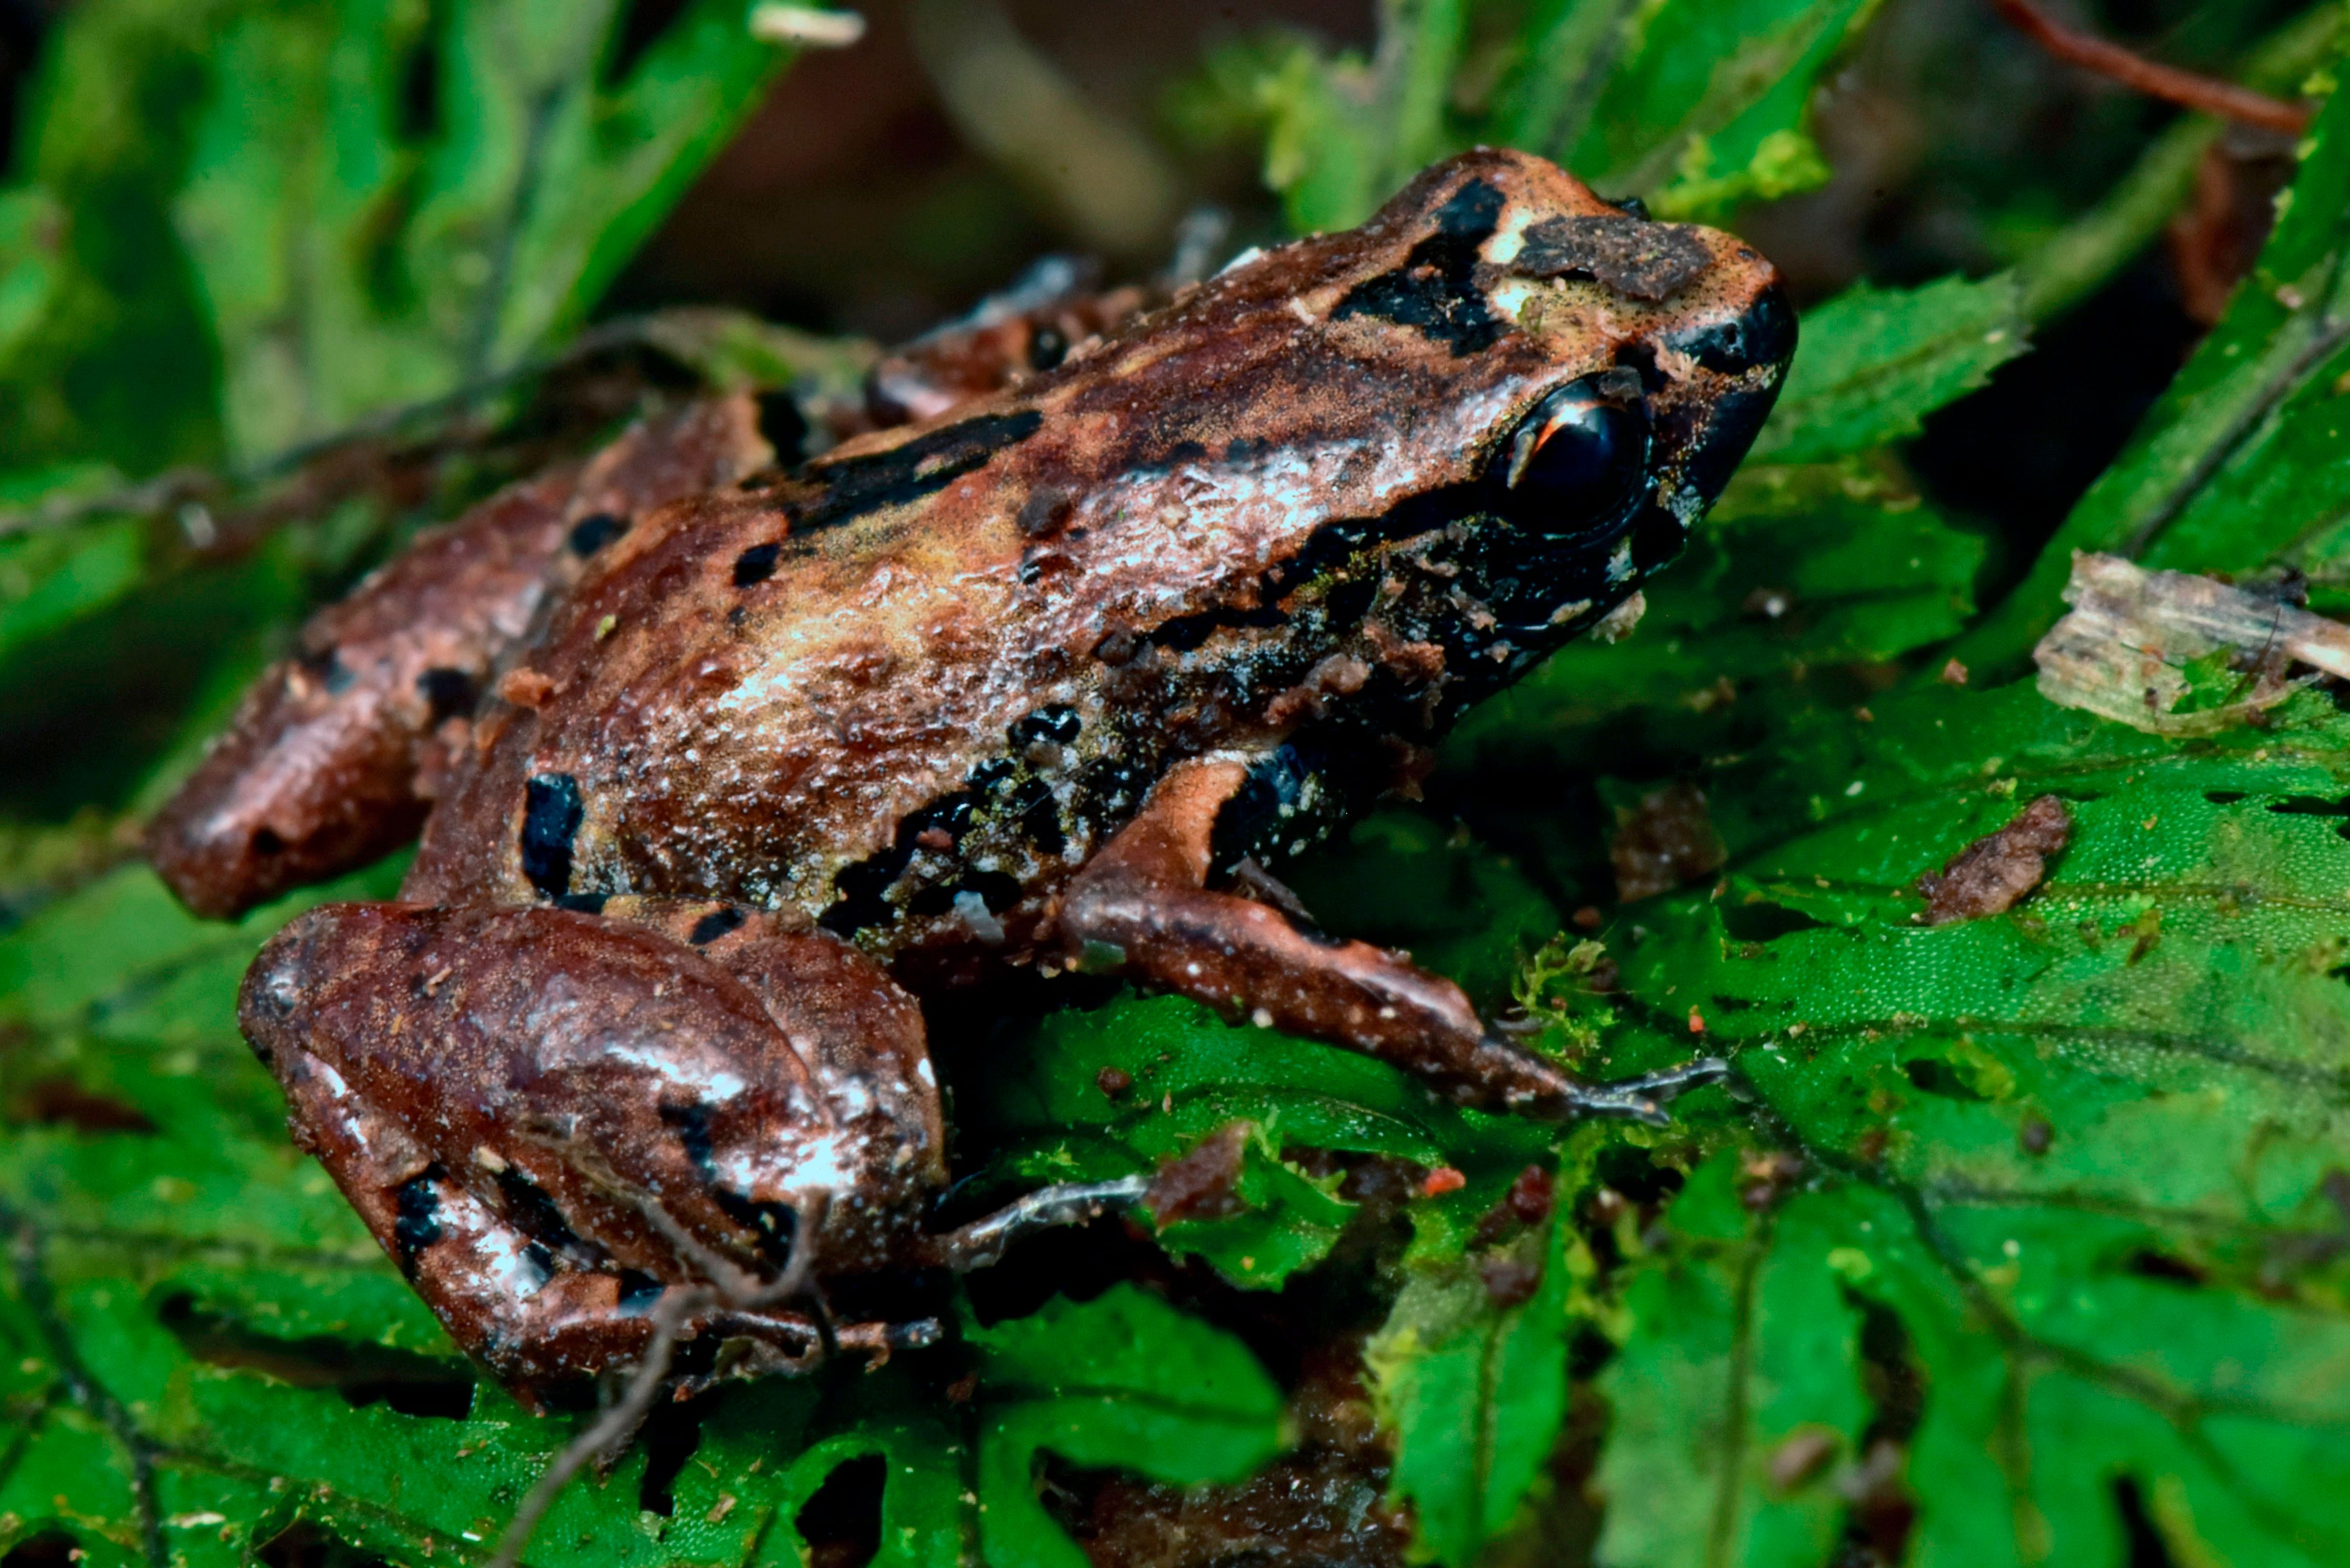 Handout picture released on December 13, 2020 by Conservation International showing a lilliputian frog recently found at the forests of Bolivia’s Zongo Valley, north of La Paz, Bolivia. - A scientific expedition discovered 20 new species of flora and fauna in the Bolivian Andes, including a snake, a viper and a frog, and rediscovered four other species that were believed to be extinct. Credit: AFP Photo